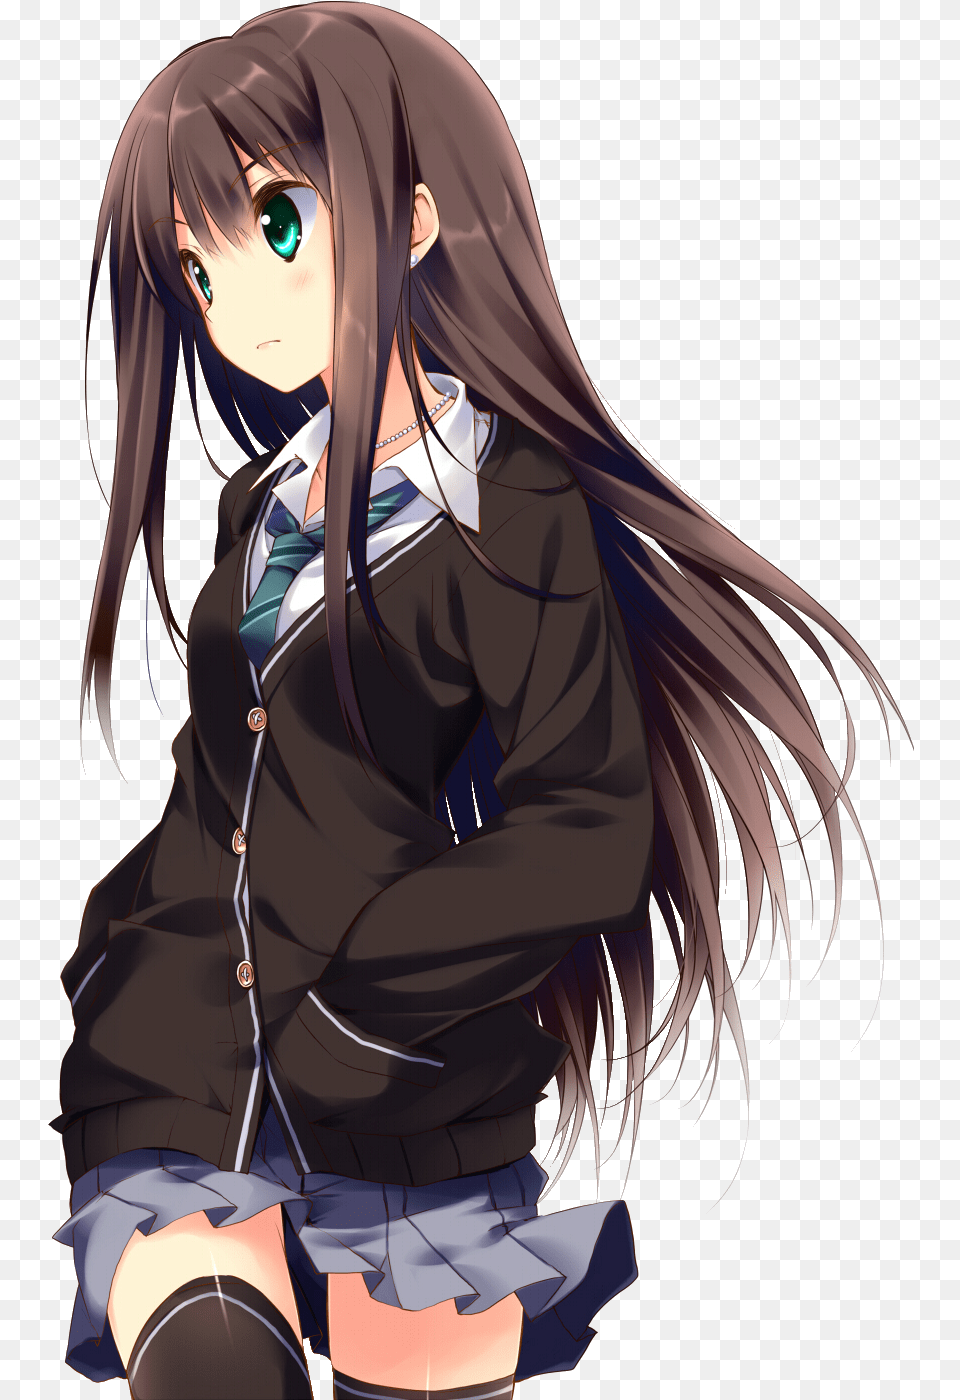 Anime Girl With Brown Hair And Blue Eyes Anime Girl Brown Hair Blue Eyes, Publication, Book, Comics, Adult Png Image